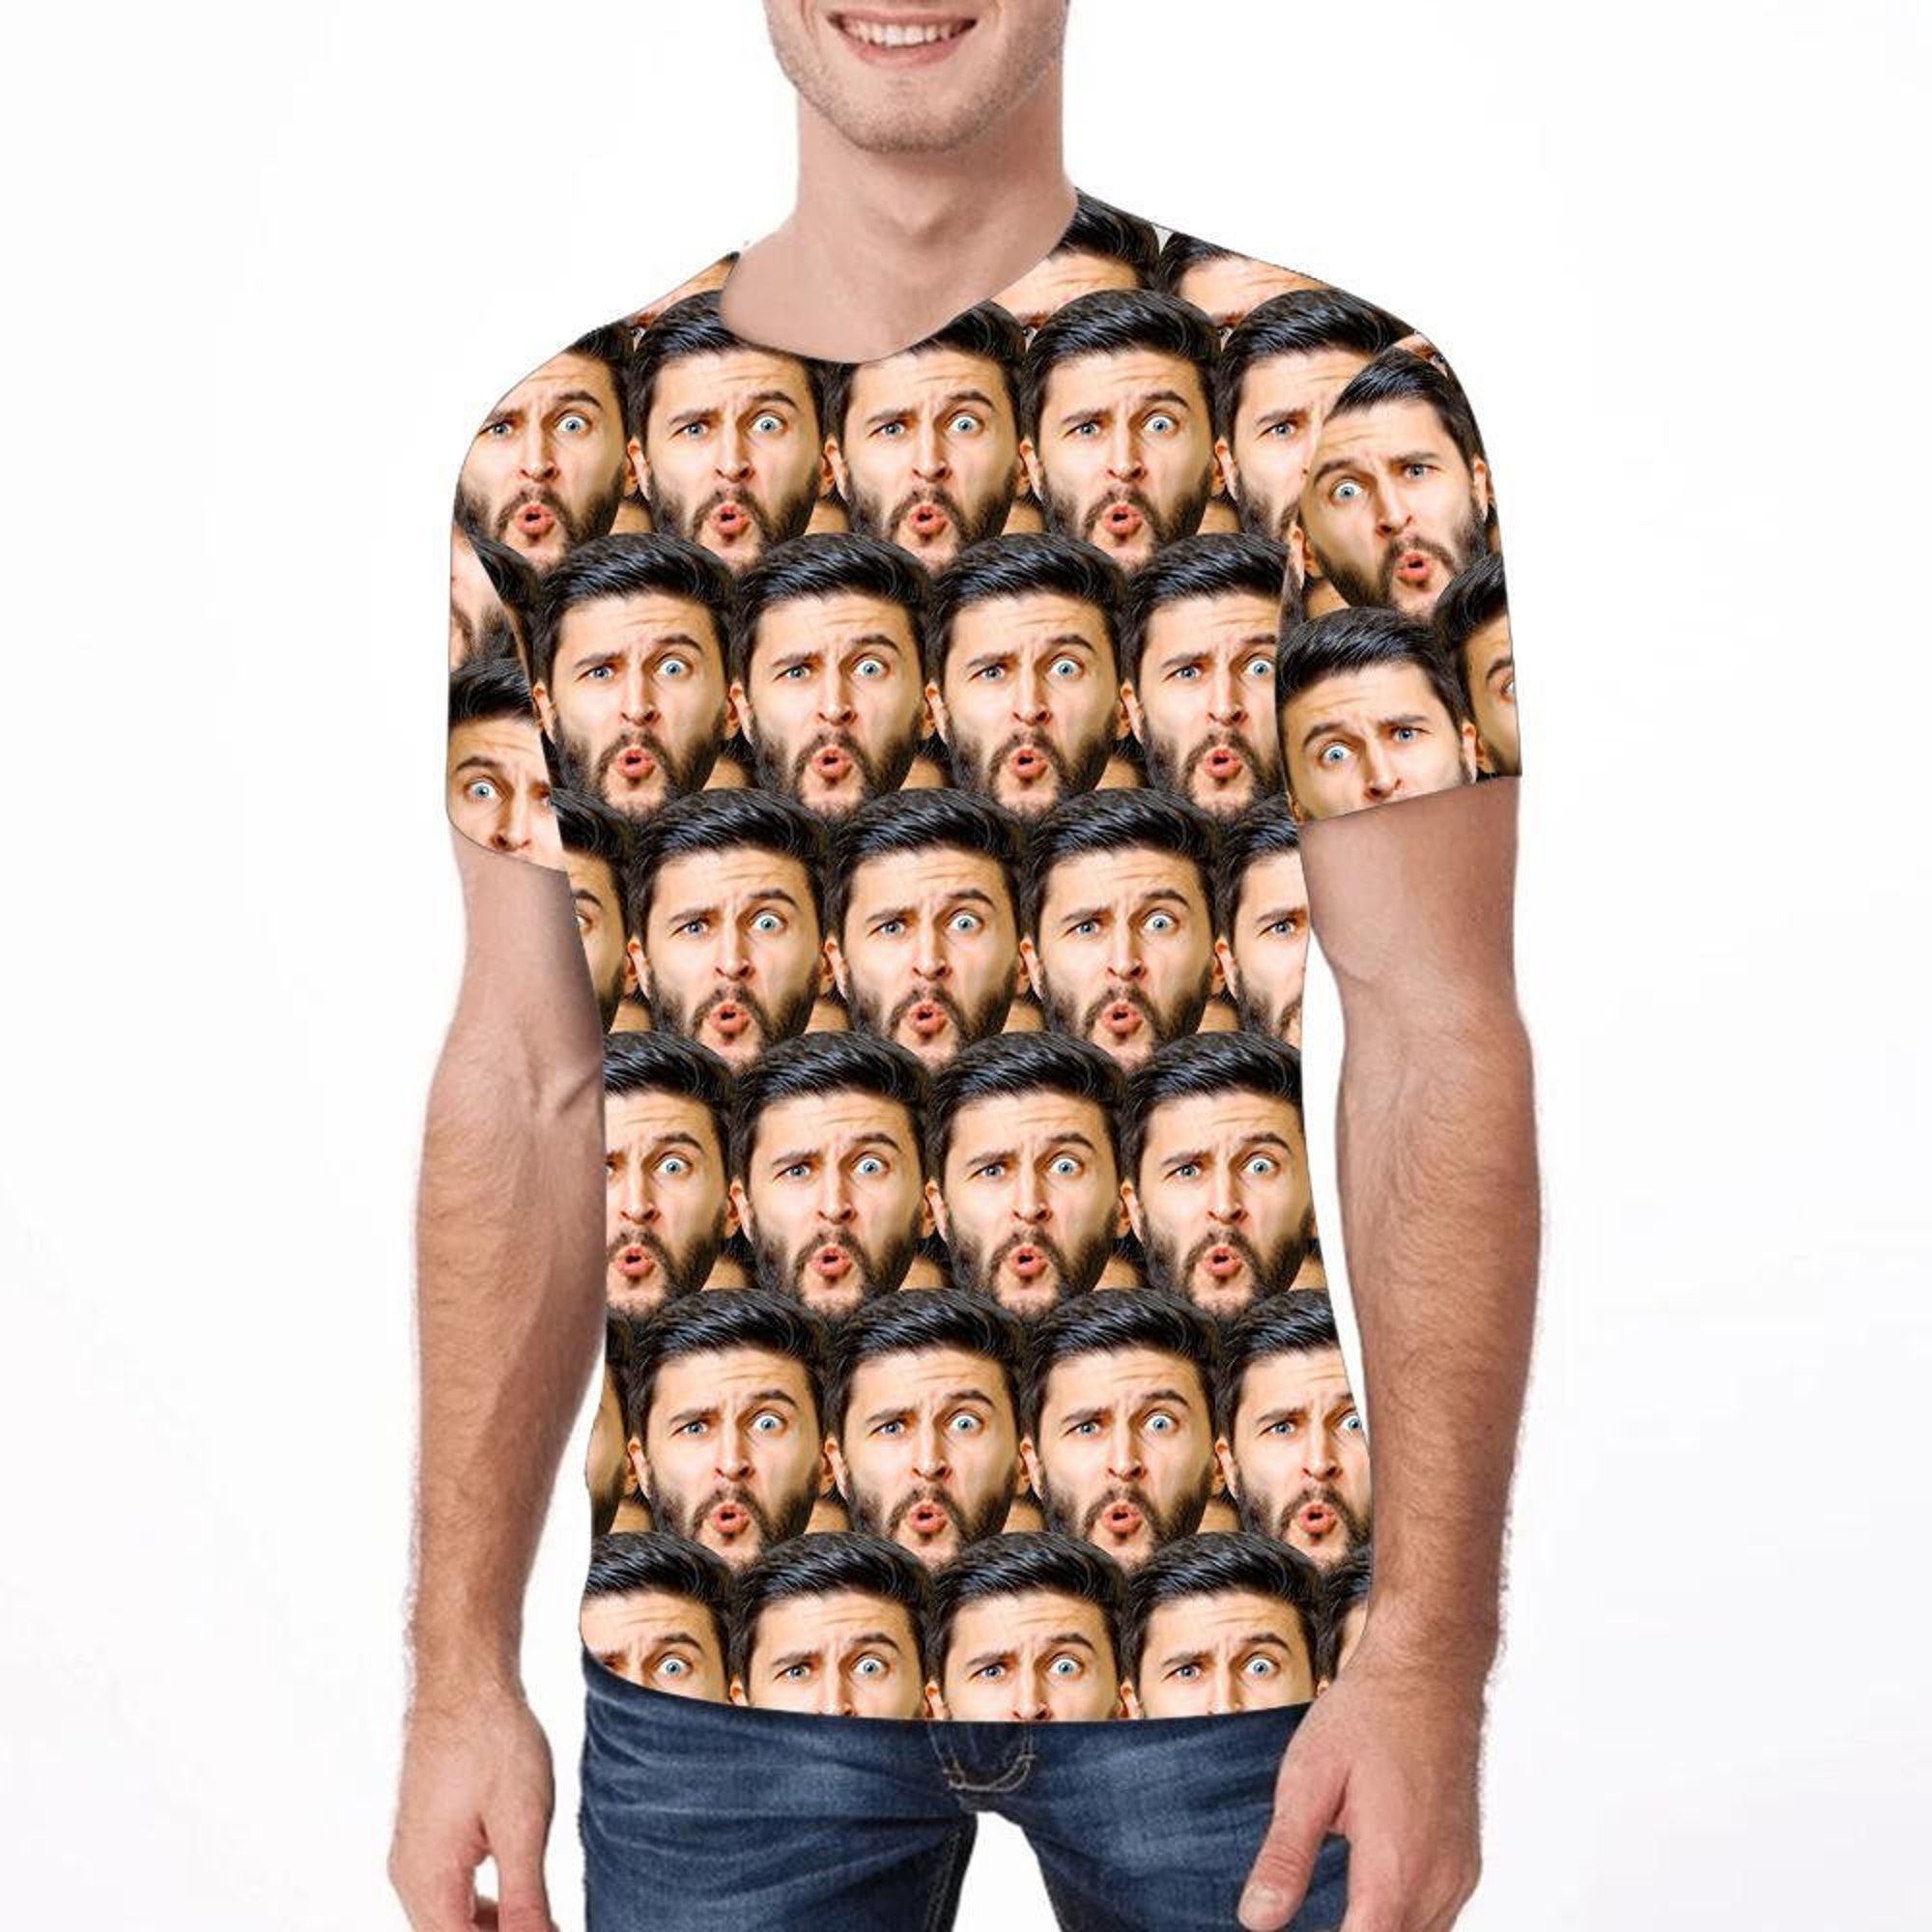 Discover Custom Photo Face Shirt - Personalized Face Shirts